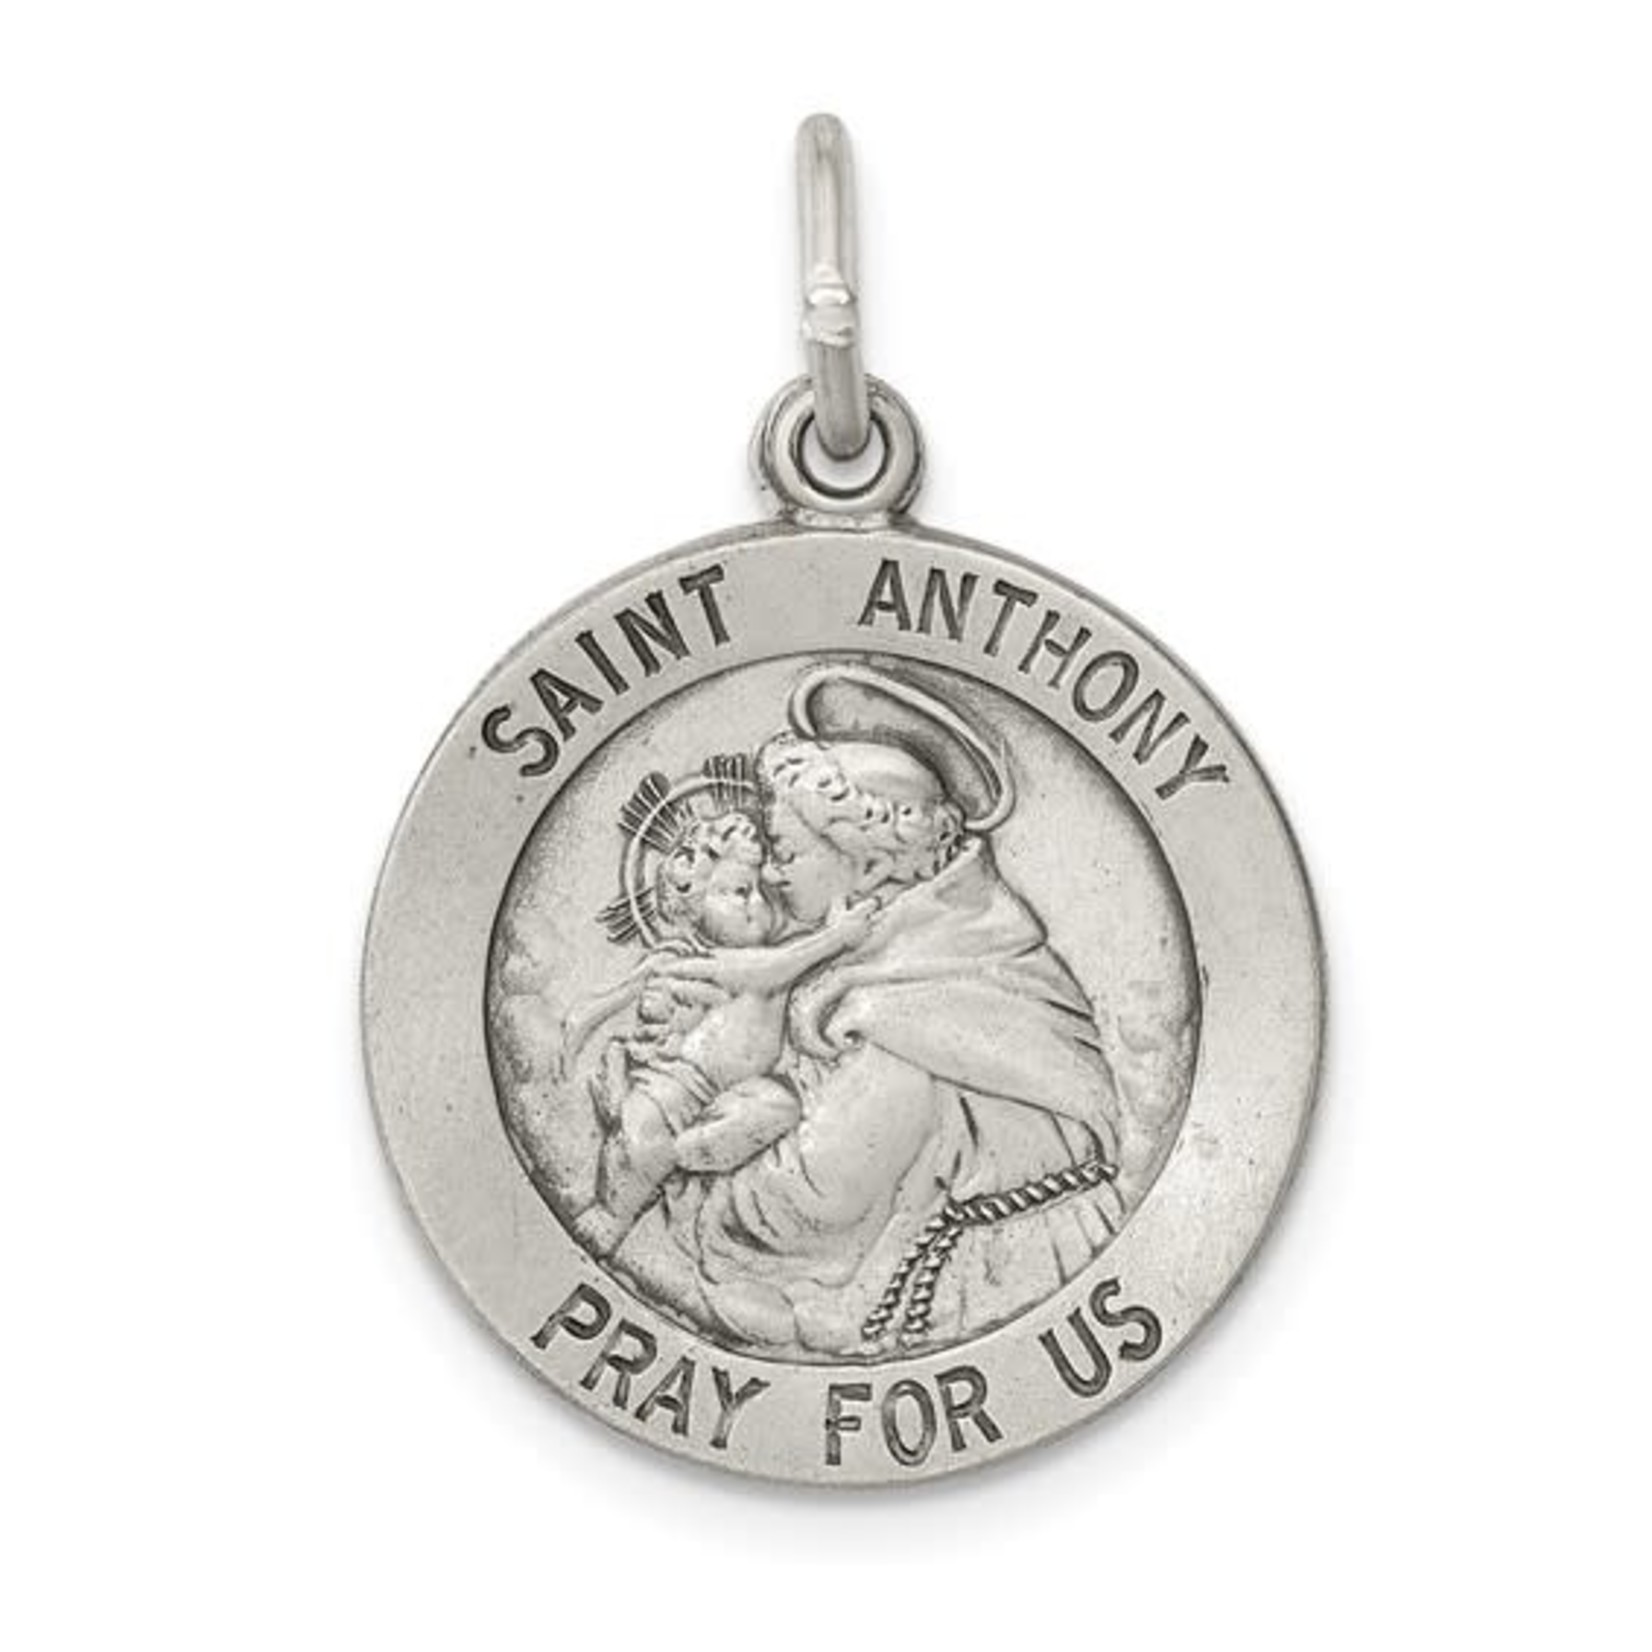 QUALITY GOLD OF CINCINNATI INC Sterling Silver Saint Anthony Medal